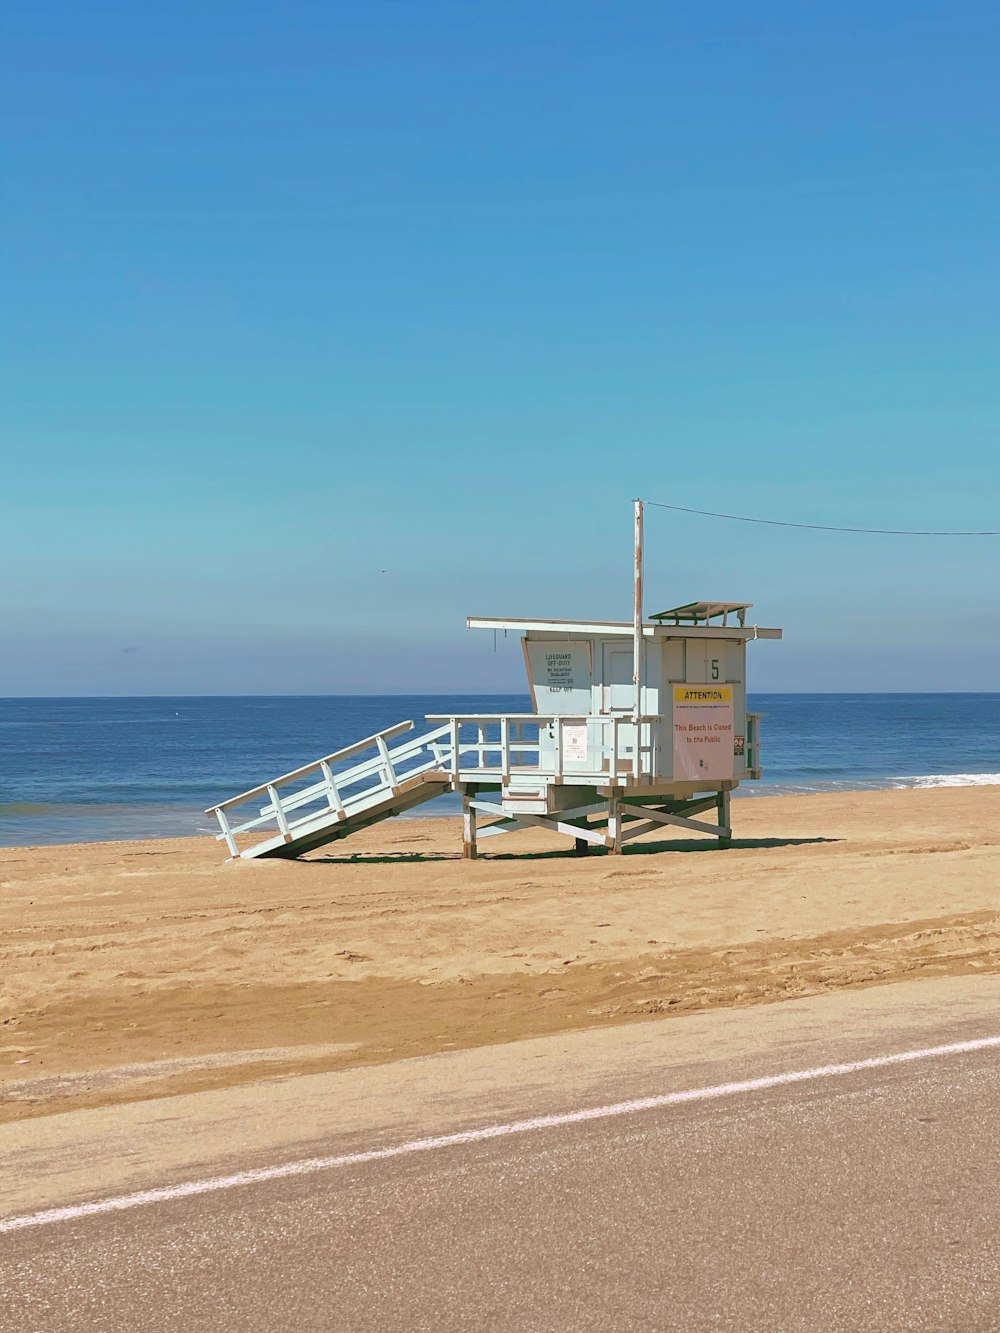 white wooden lifeguard house on beach shore during daytime